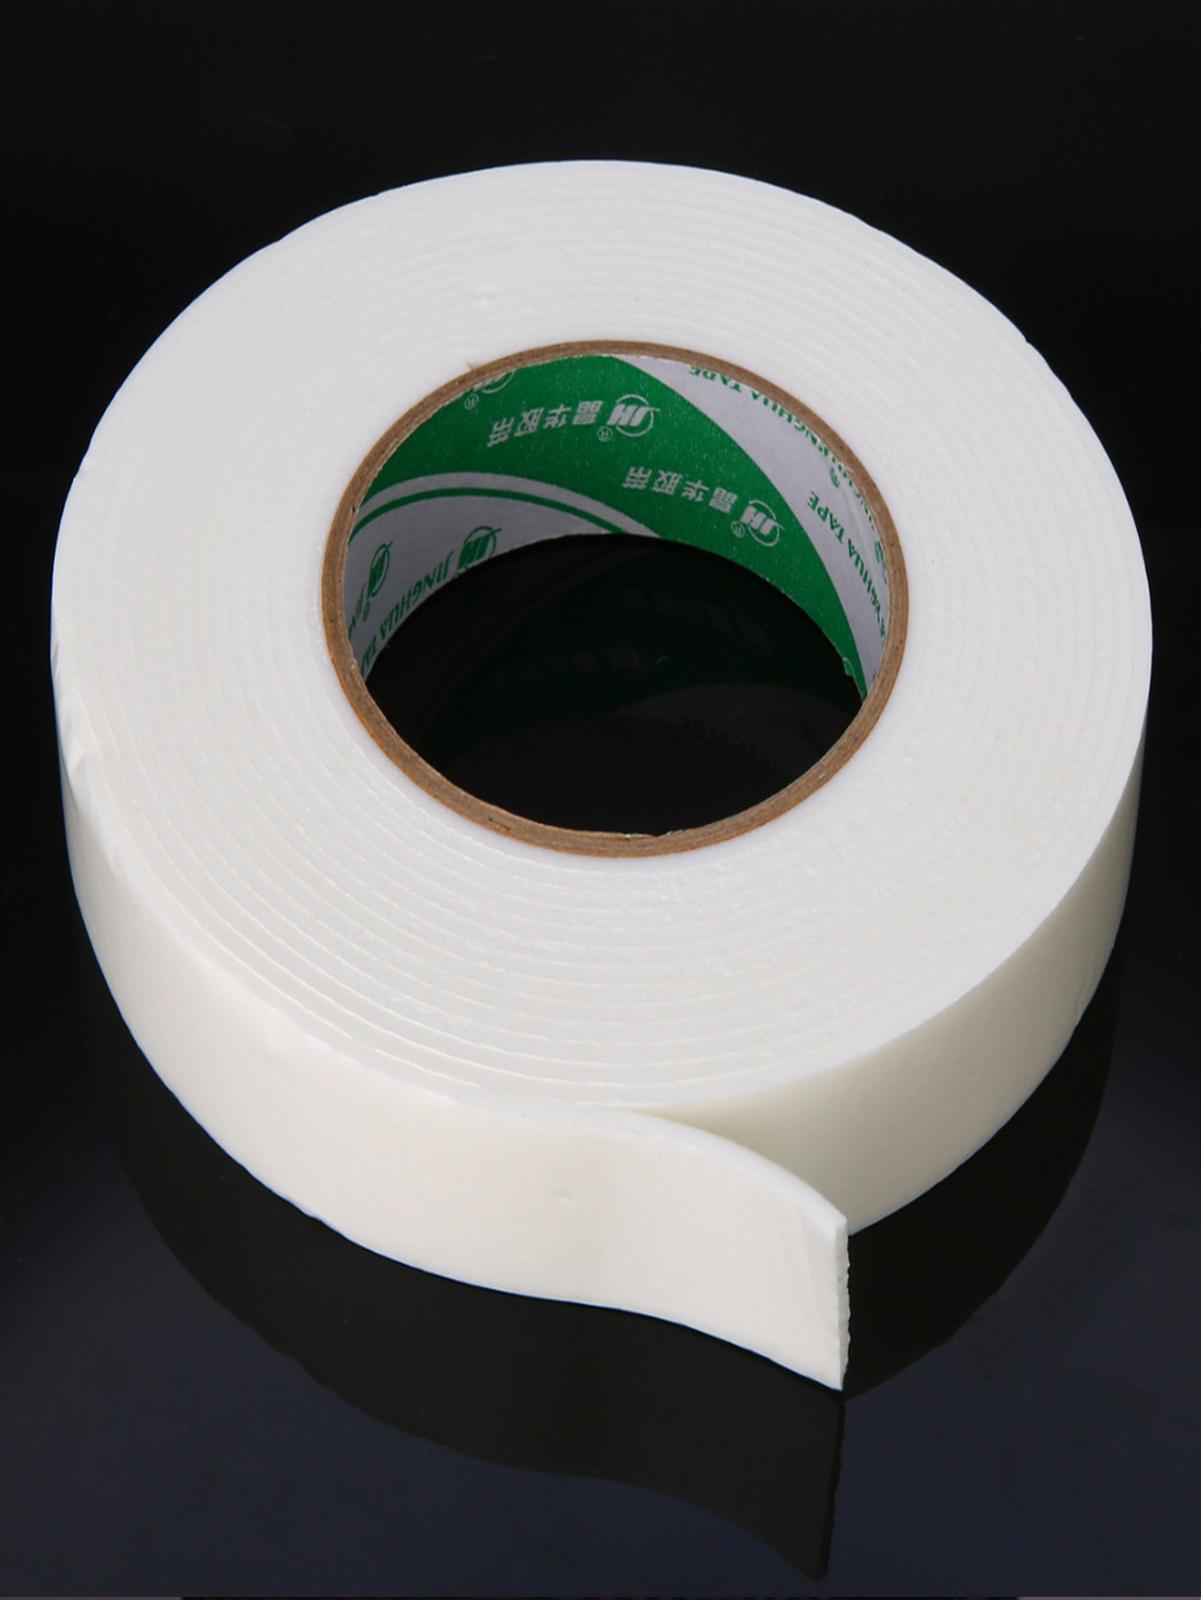 Bws Super Strong Faced Powerful Adhesive Foam Paper Double Sided Tape For Mounting Fixing Pad Sticky 1 Inch Buy Online At Best Prices In Pakistan Daraz Pk